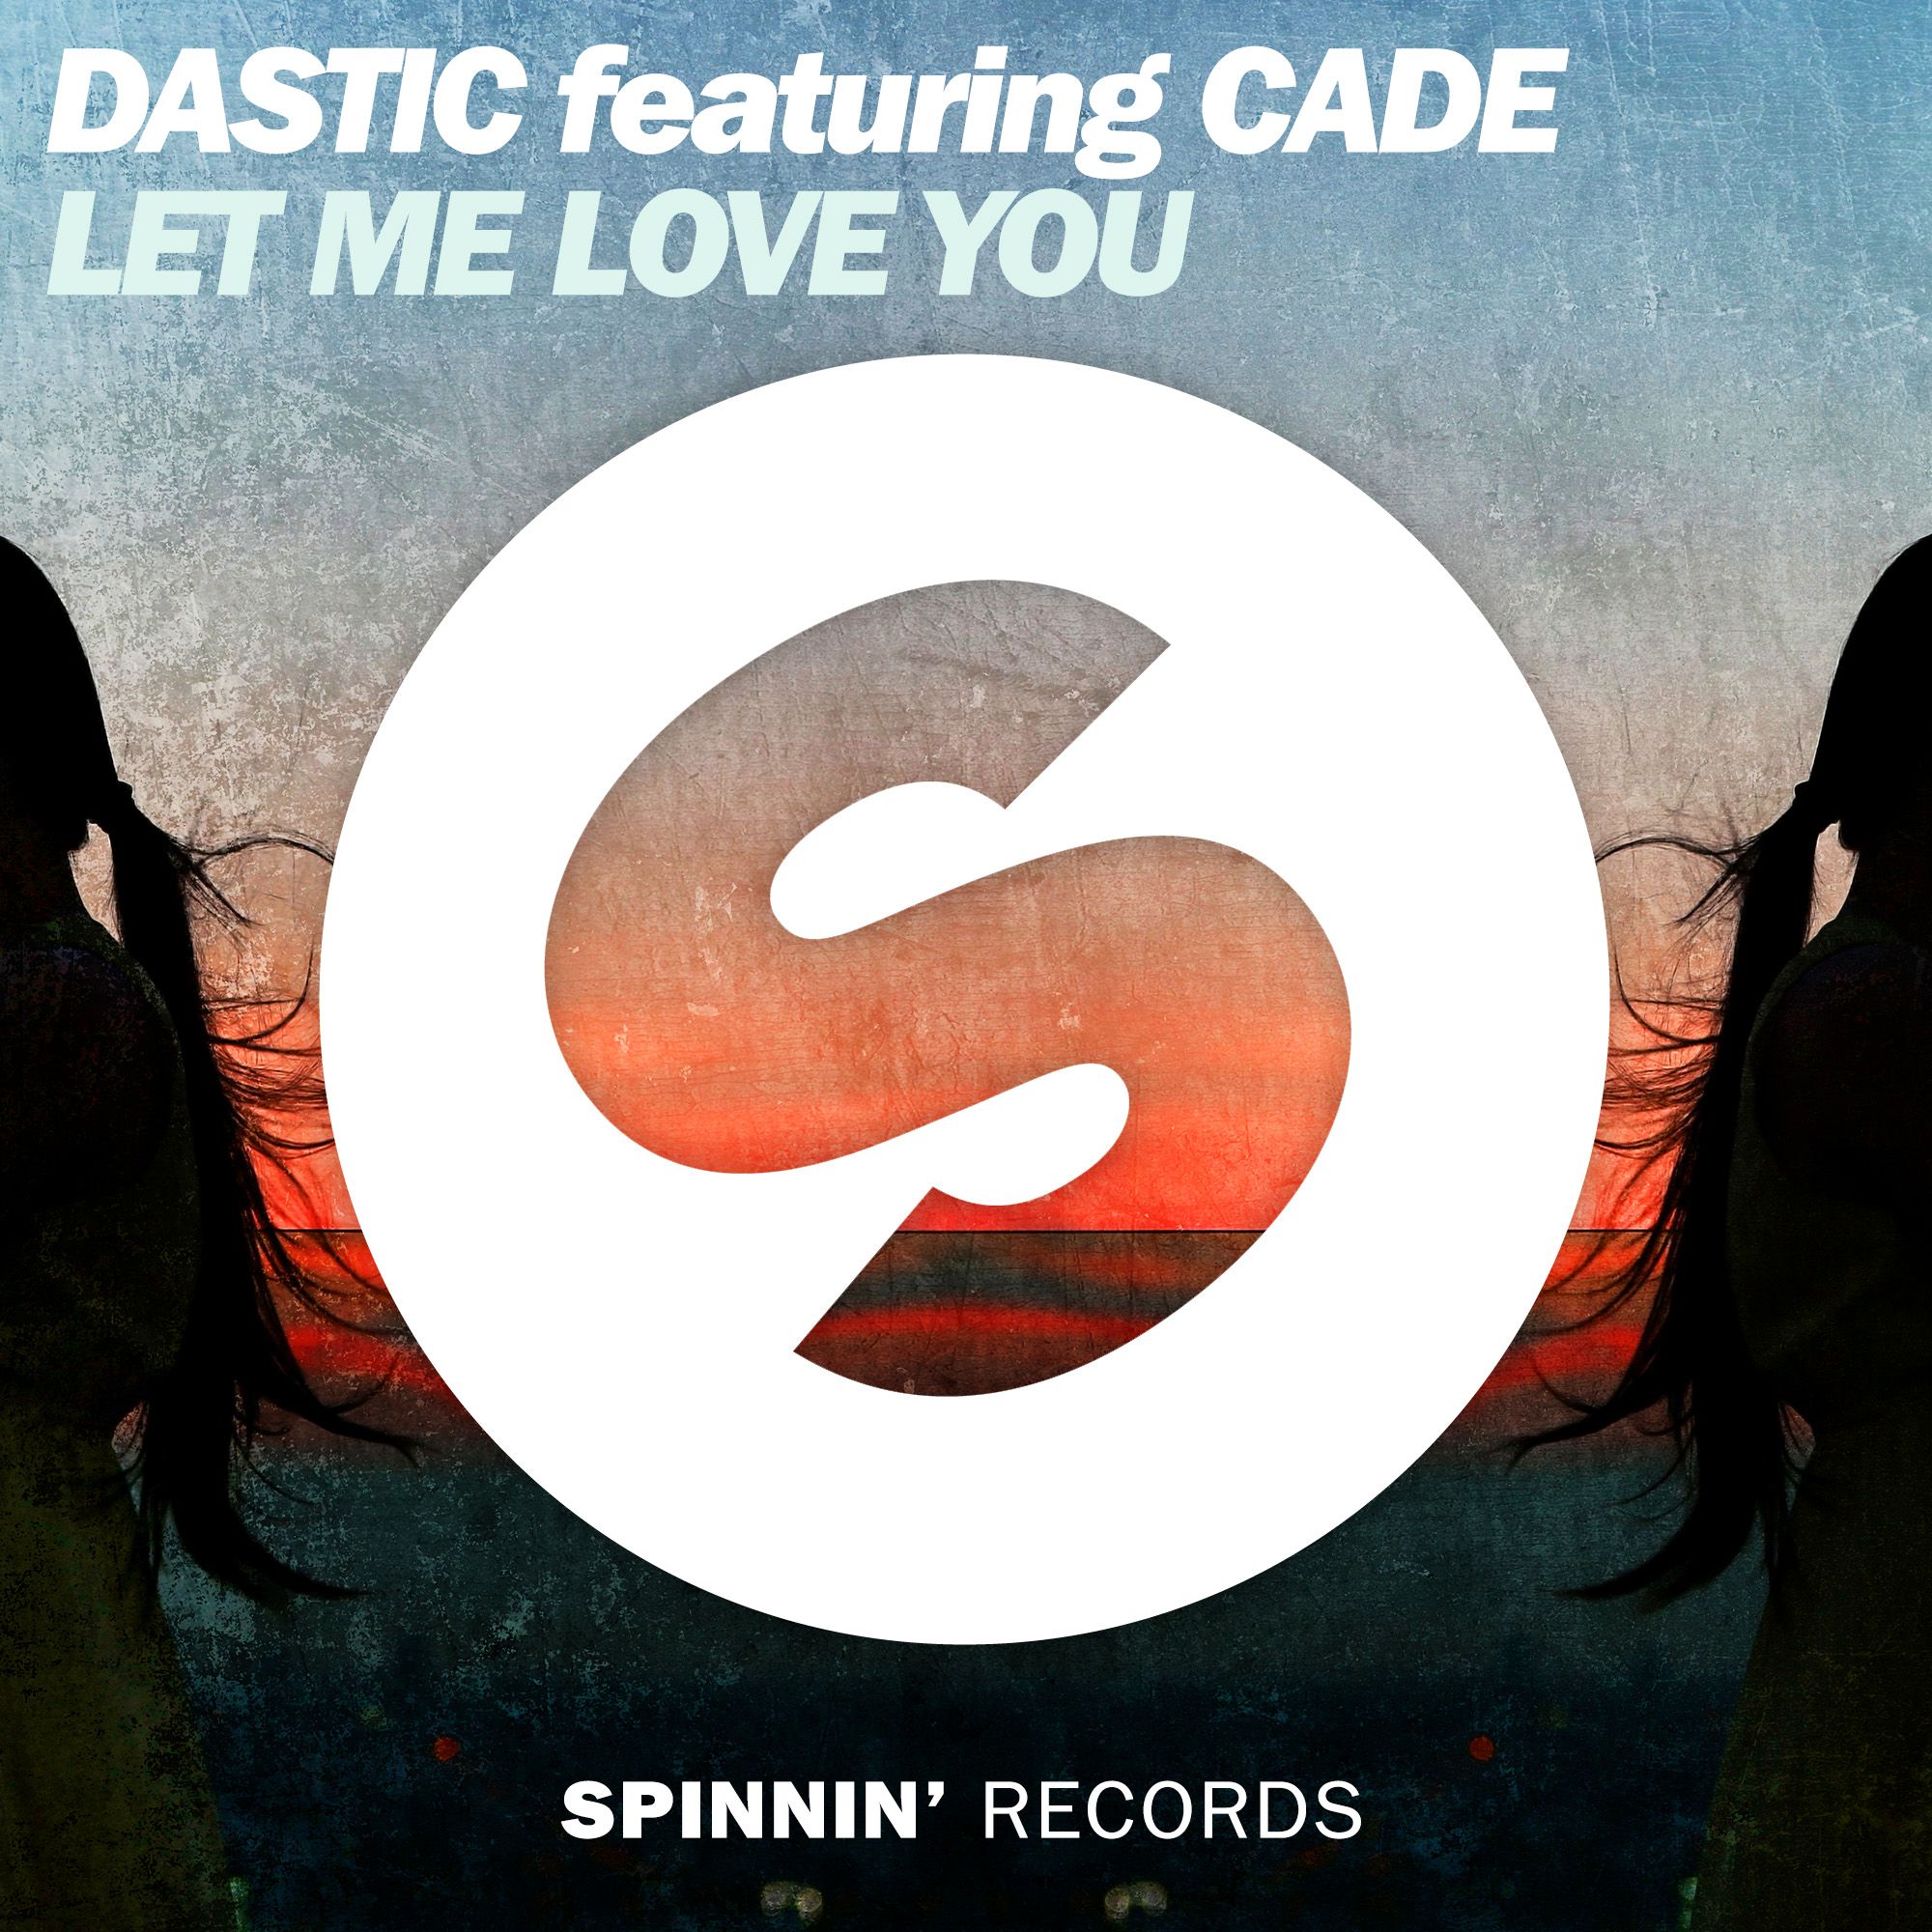 spinnin_dastic_featuring_cade_-_let_me_love_you.jpg